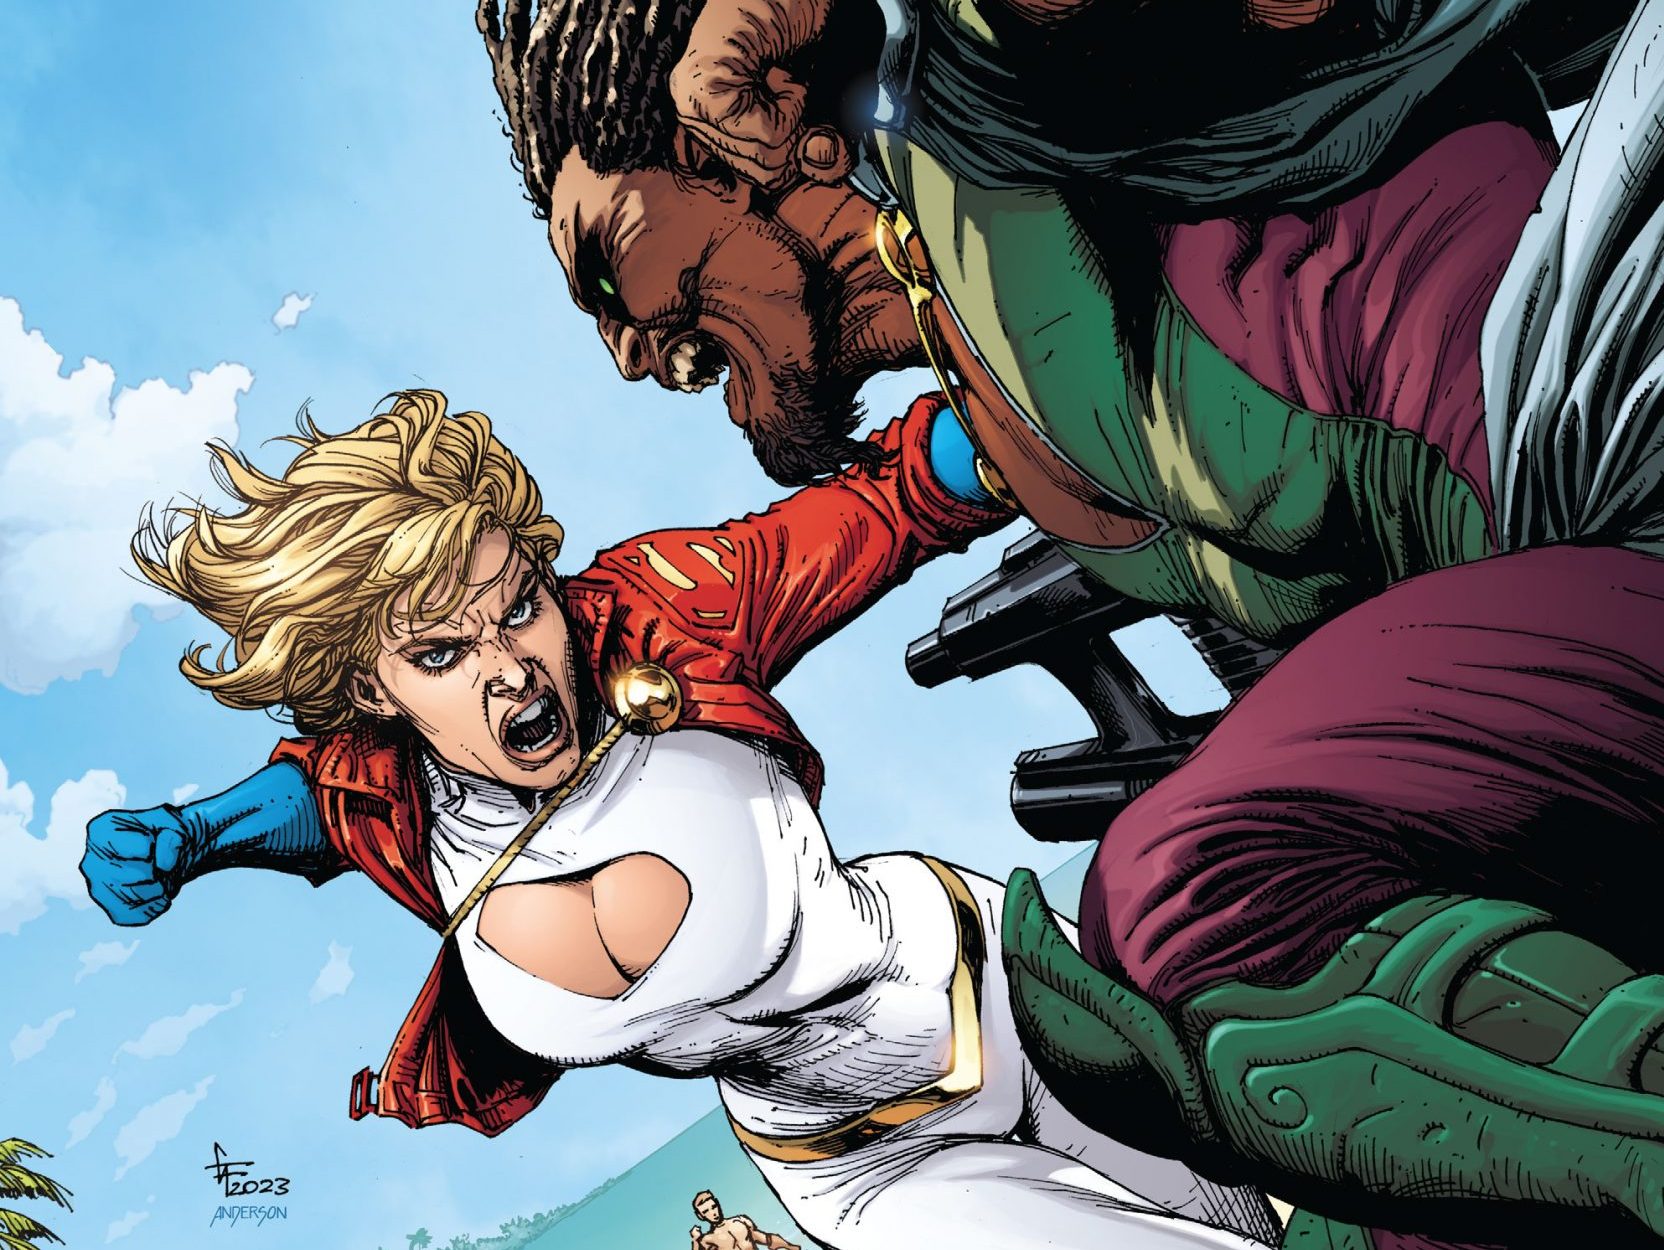 'Power Girl' #2 is sharp improvement over its debut